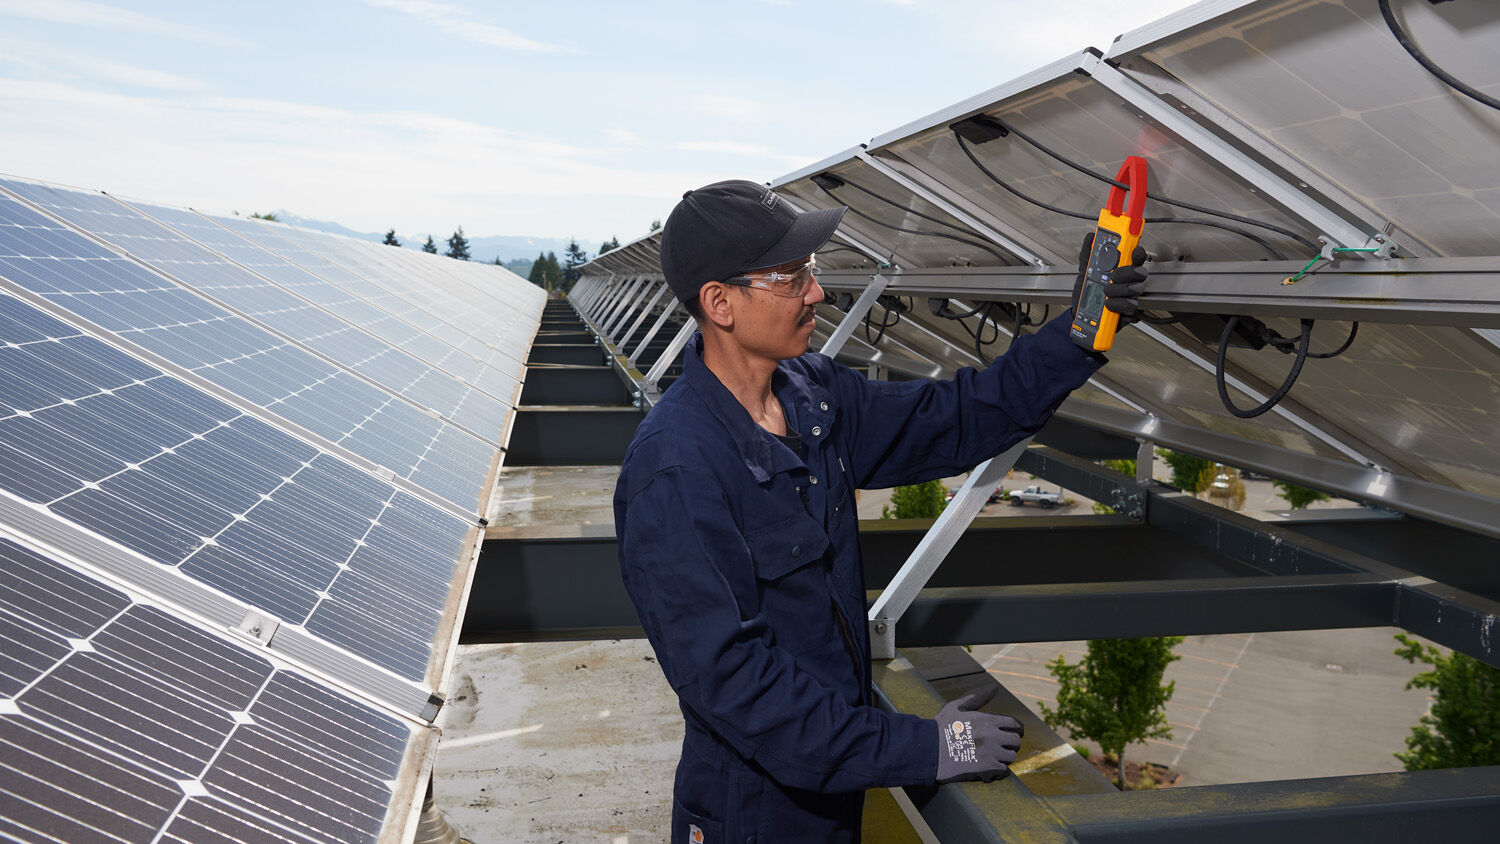 Top 3 safety hazards to avoid for PV solar installations